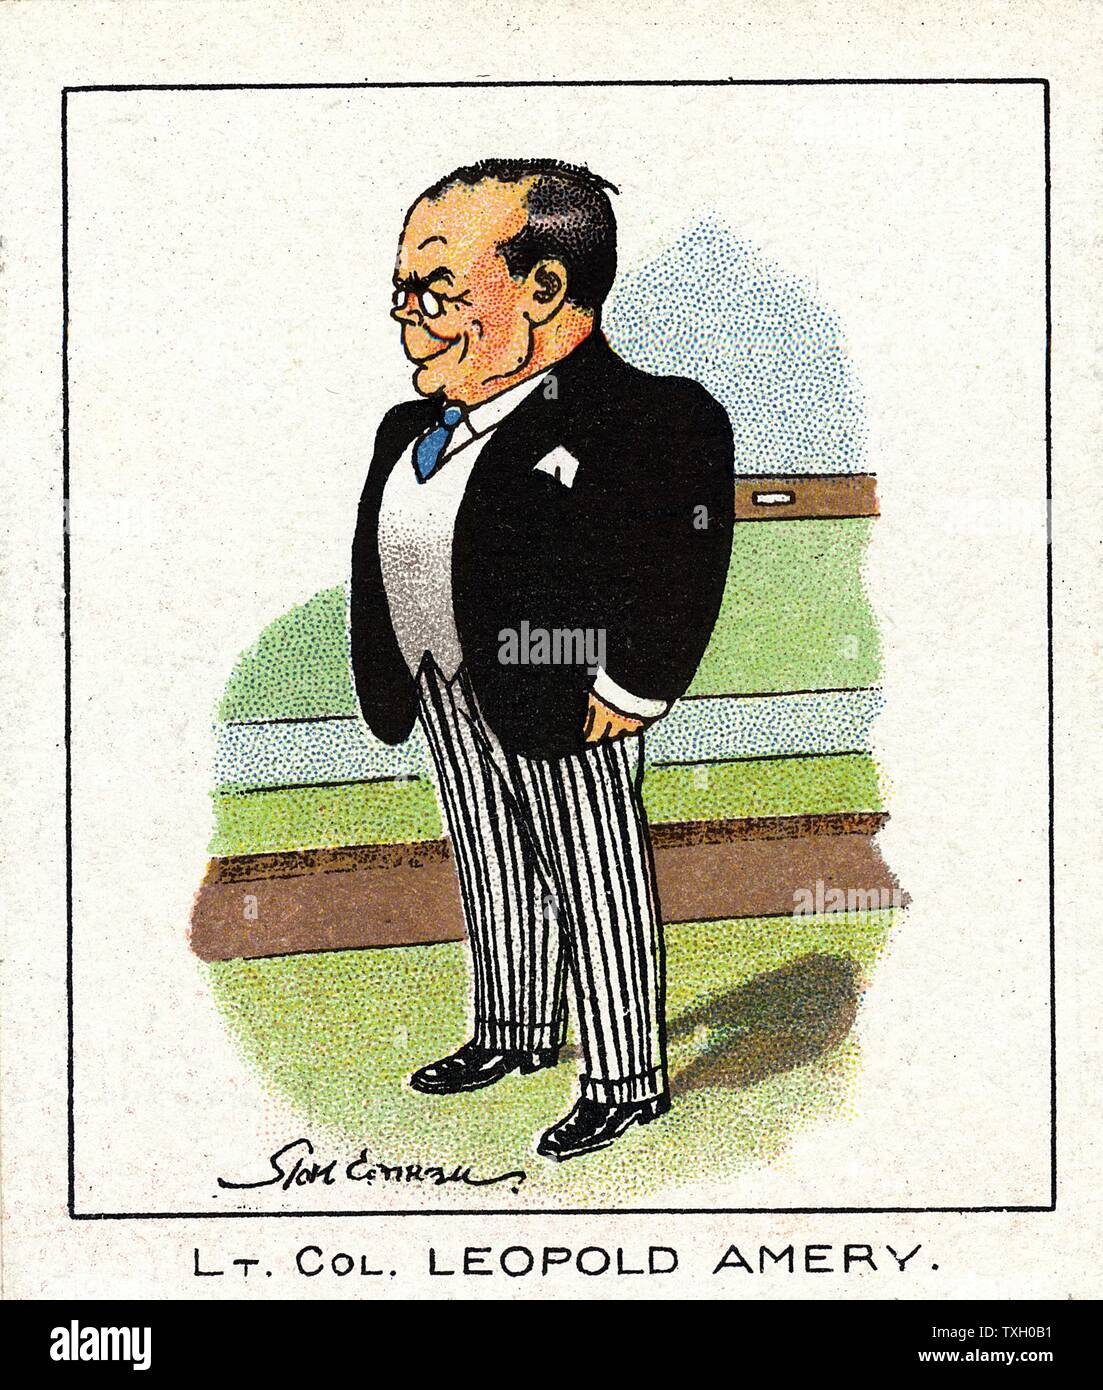 Leopold Charles Maurice Stennett Amery (1873-1955) English Conservative politician. Reputed to have said to Neville Chamberlain in 1940 'In the name of God, go!'. Chromolithograph card 1929. Stock Photo